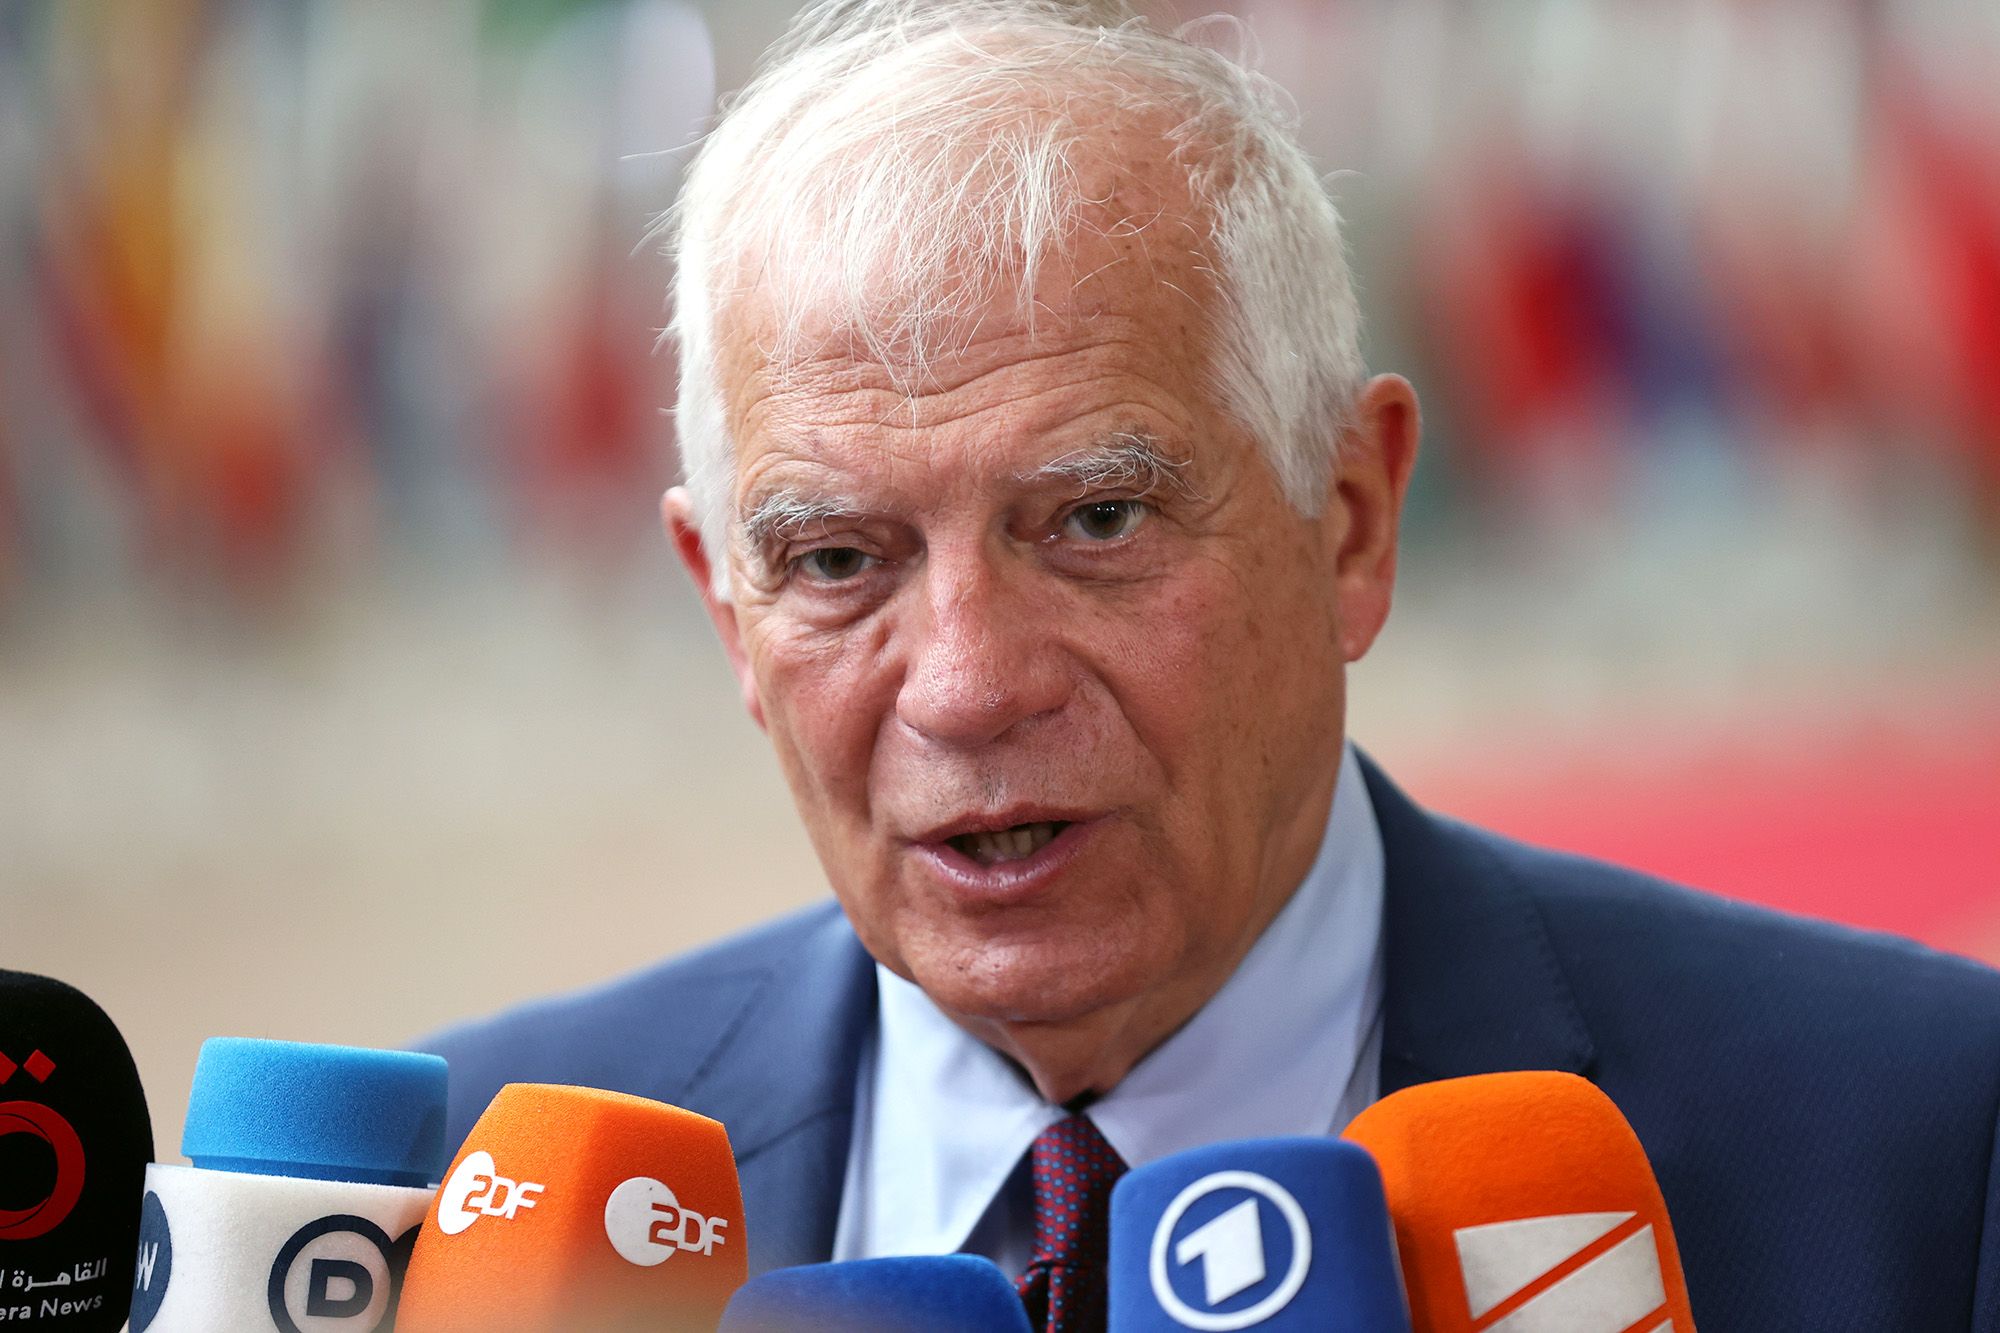 EU High Representative for Foreign Affairs and Security Policy Josep Borrell makes a press statement ahead of the EU Defense Ministers' meeting in Brussels, Belgium, on May 23.